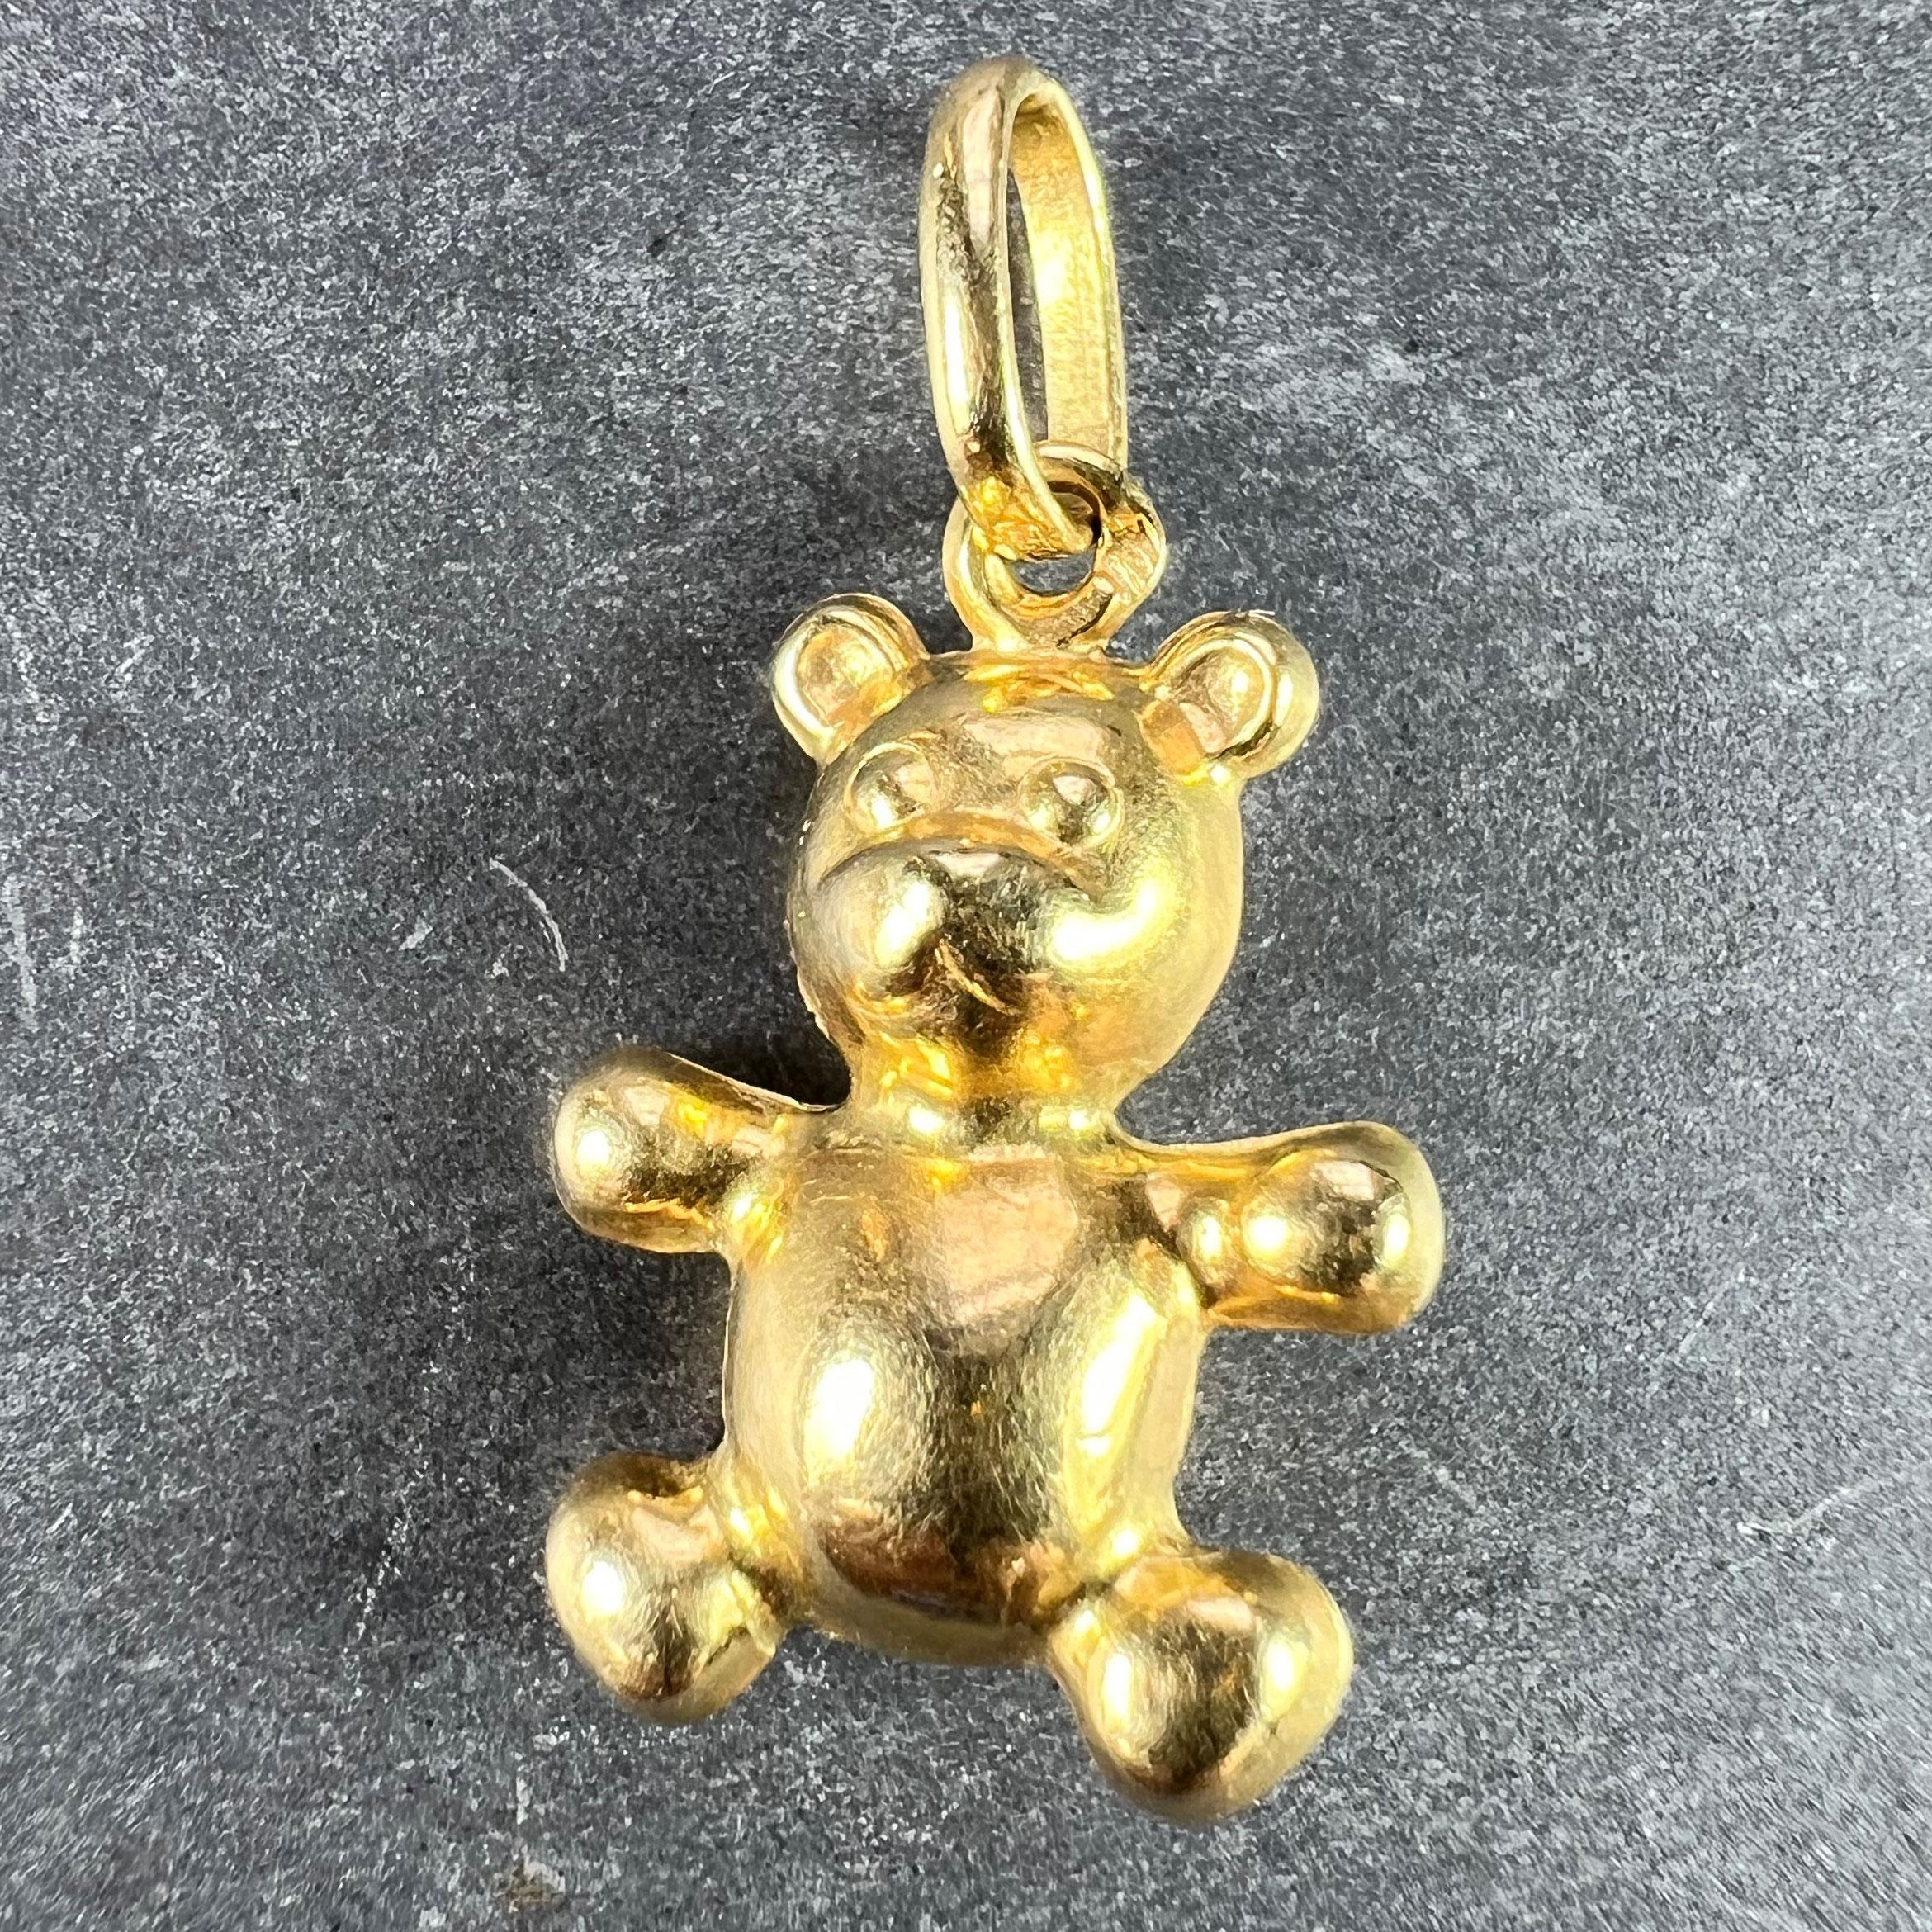 A French 18 karat (18K) yellow gold charm pendant designed as a 3-dimensional teddy bear. Stamped with the eagle's head for French manufacture and 18 karat gold.

Dimensions: 1.8 x 1.5 x 0.25 cm (not including jump ring)
Weight: 1.39 grams
(Chain